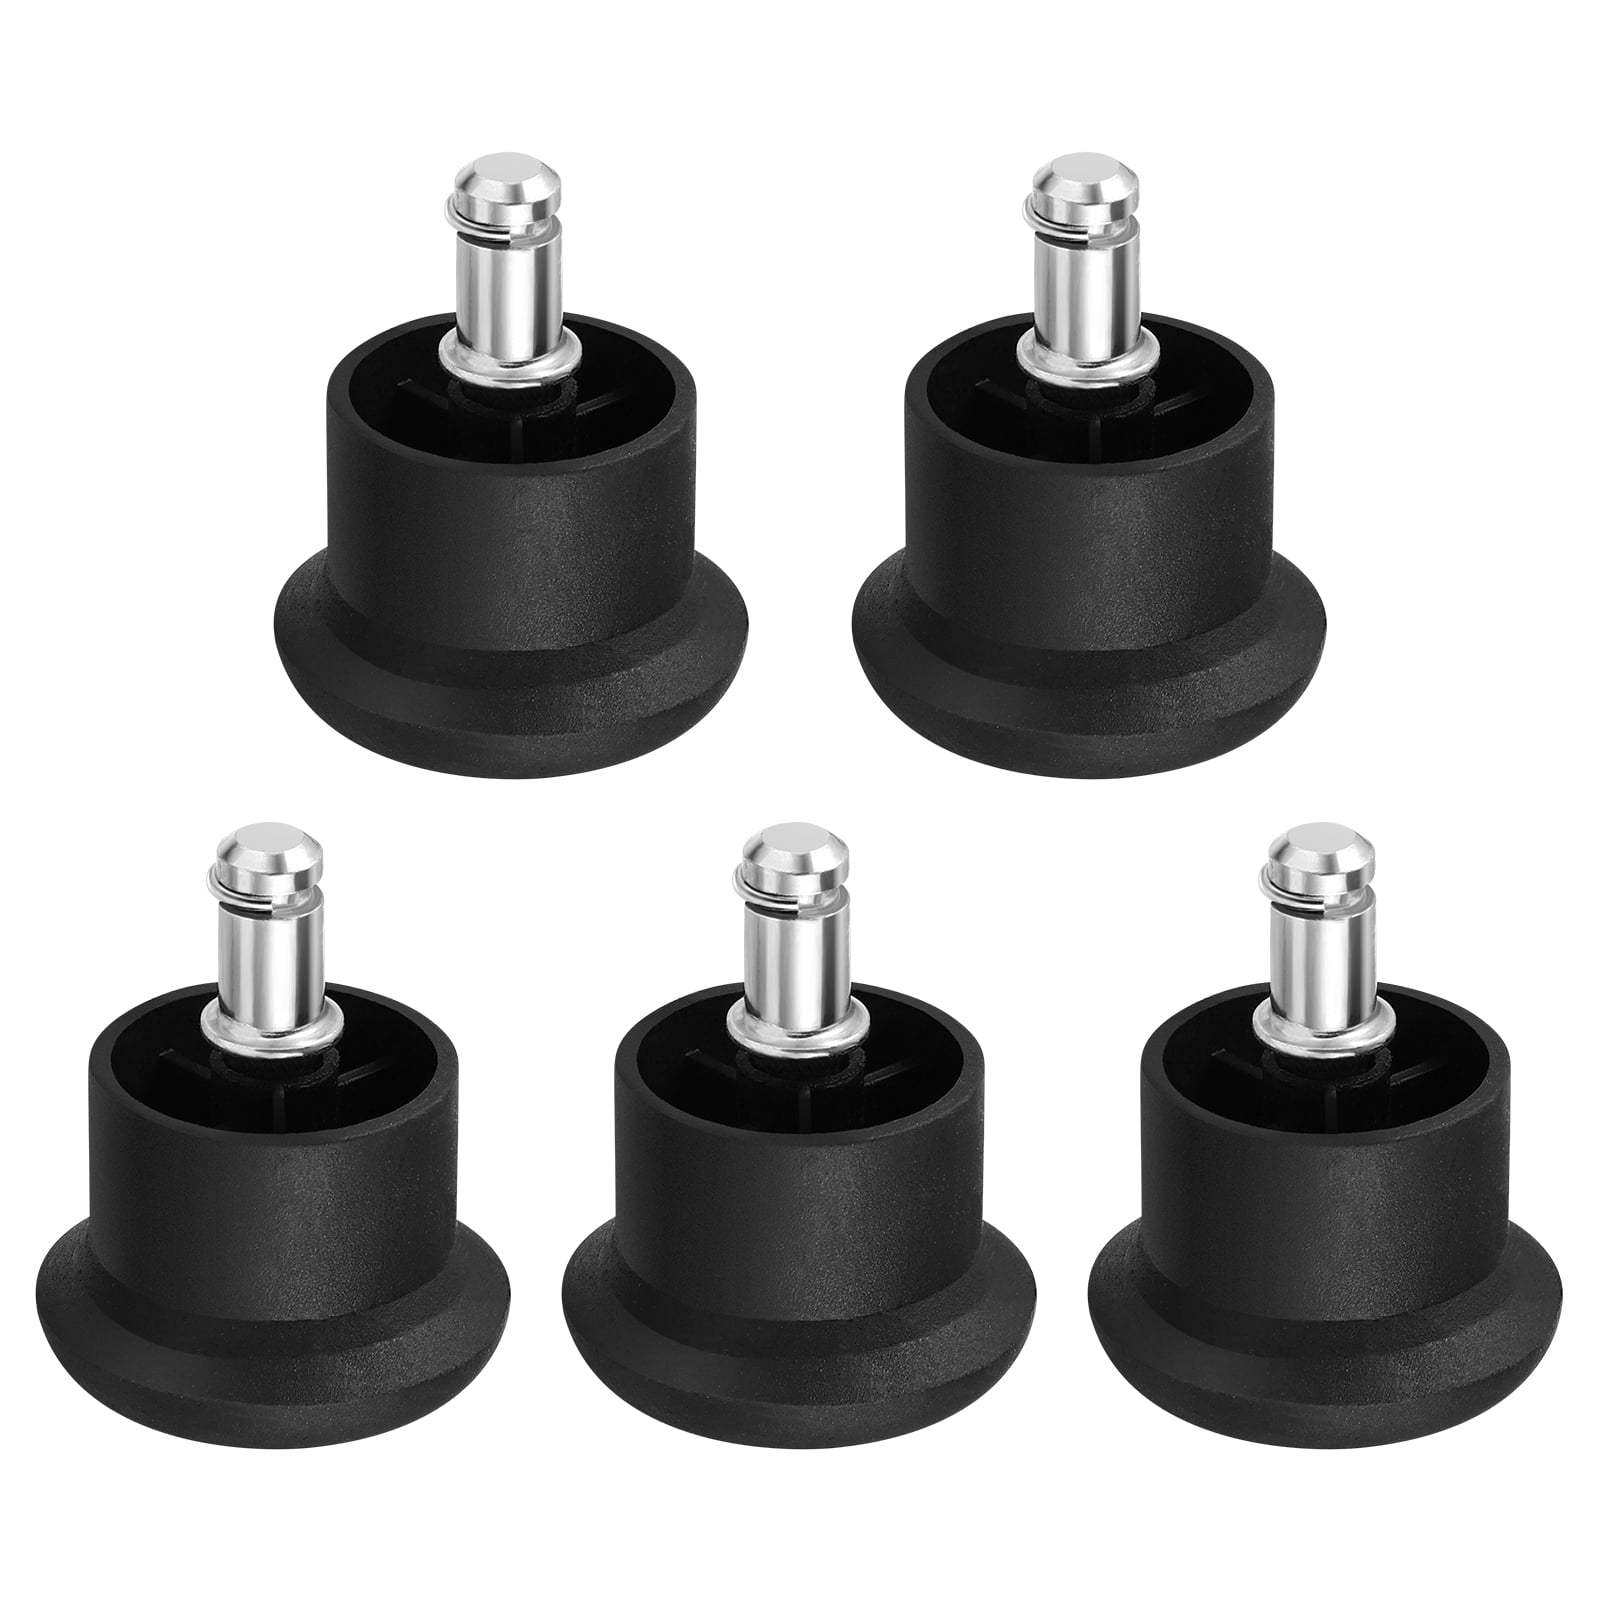 Color : Brake+universal 41mm Dual Wheel Rotatable Caster Wheels Furniture Replacement Caster,Small Nylon Castor Wheels,Swivel Chair Accessories,Load Capacity 55kg,M8x15mm Threaded Stem,4 Pcs,Black